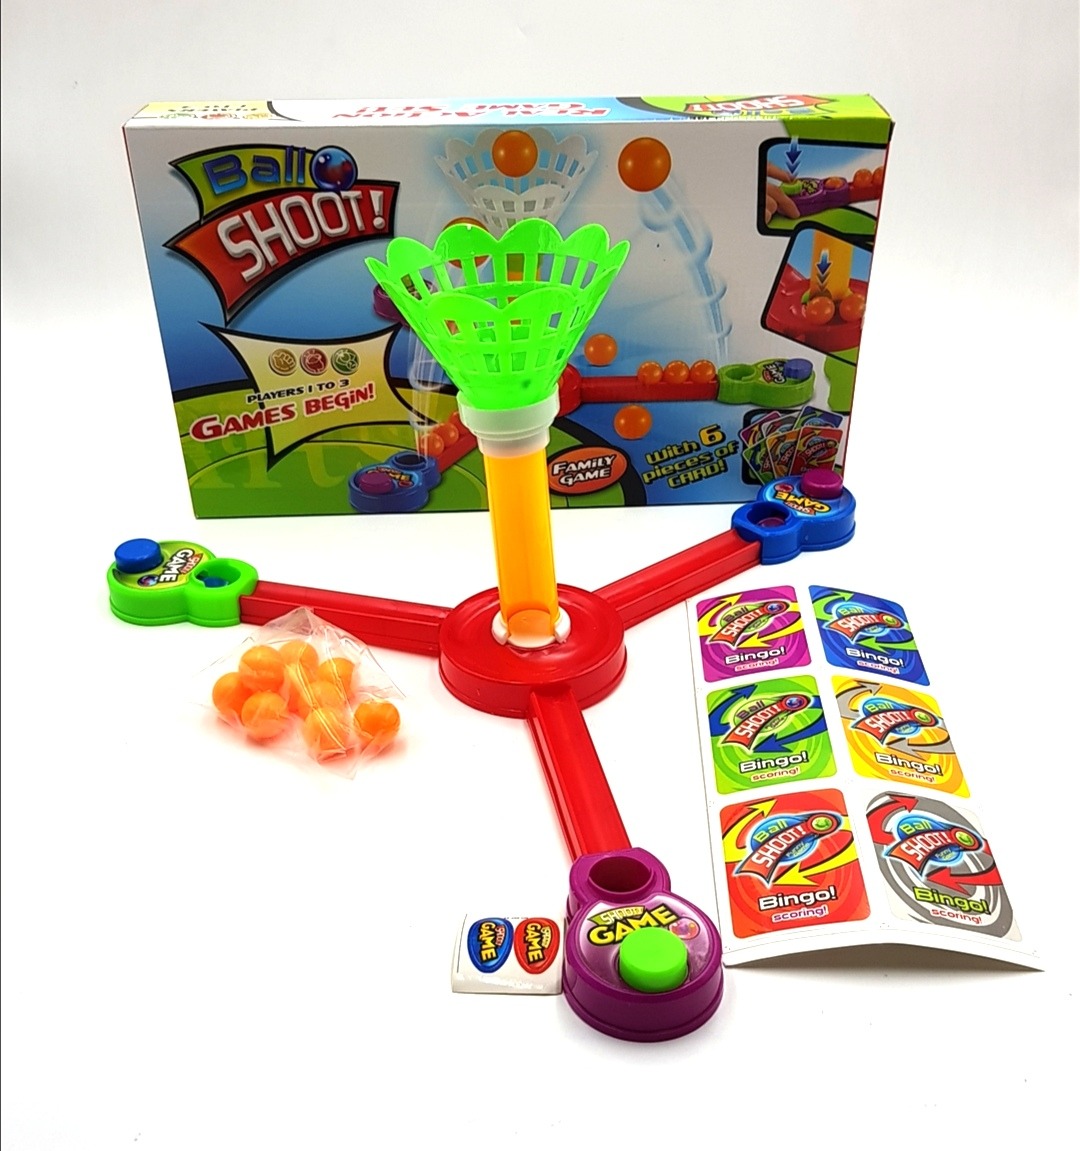 Ball Shoot is a game set for 1 - 3 players aged 5 and up! Concentrate, aim and shoot! Who will get more baskets and wins? A game set for the entire family, each Ball Shoot set comes with 6 challenge cards!